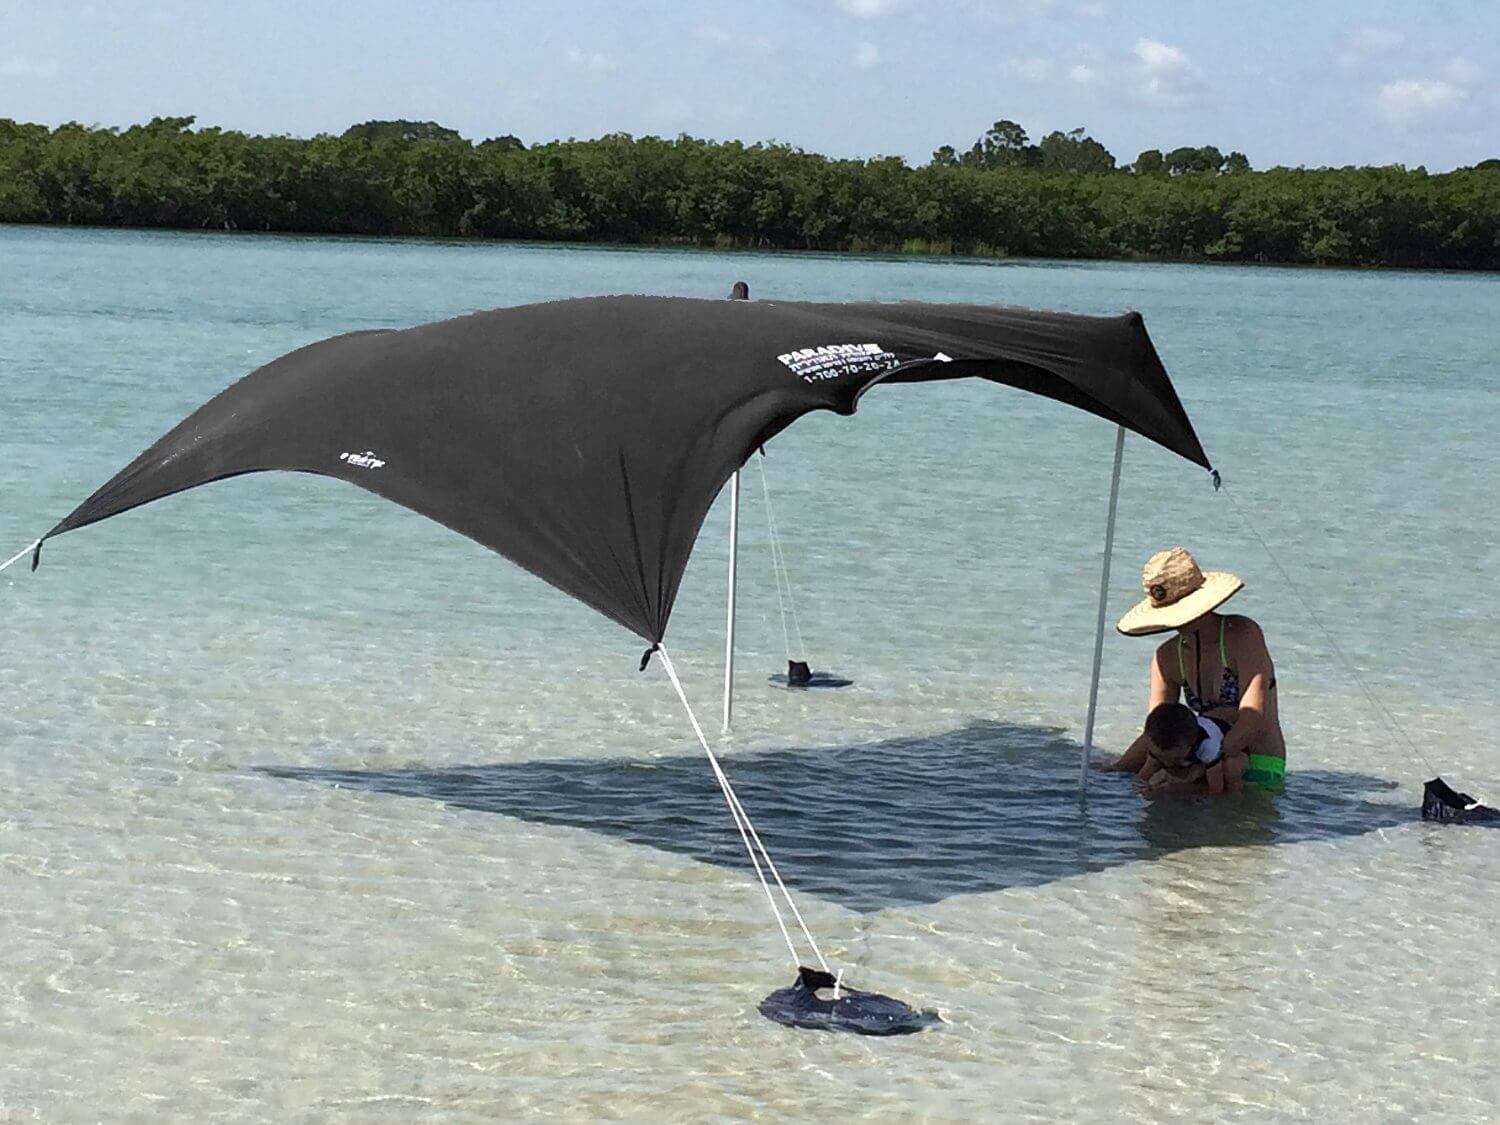 Best Beach Canopy of 2020 - Reviews & Buying Guide